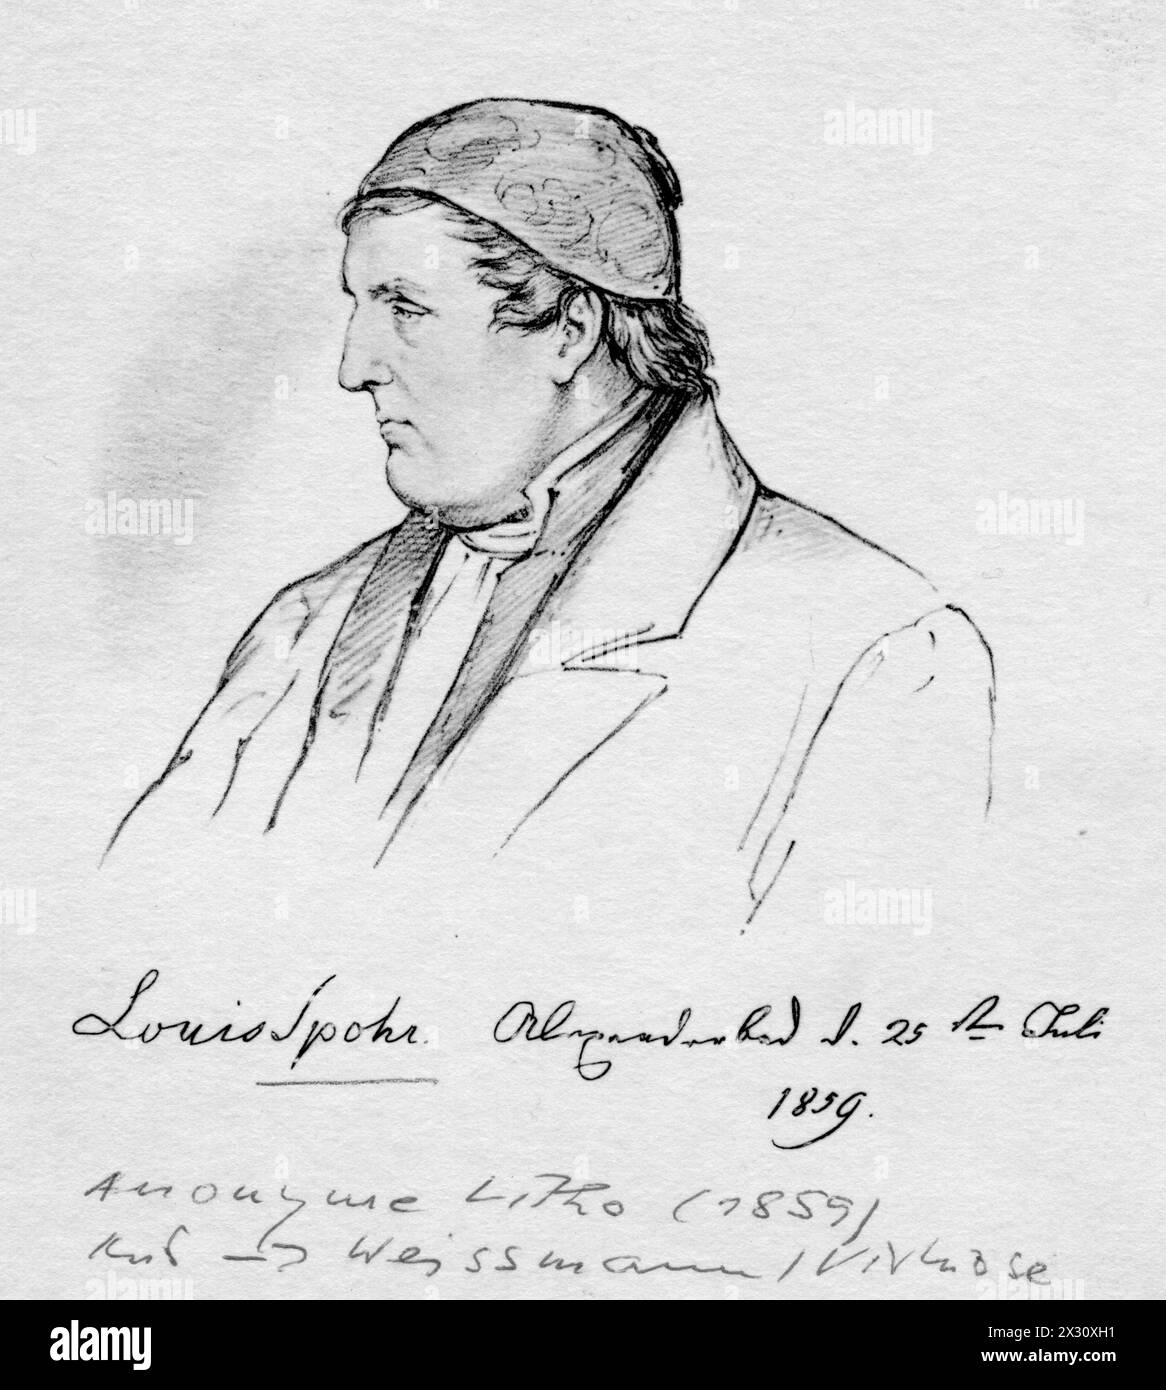 Spohr, Ludwig, 5.4.1784 - 22,10 1859, compositeur et chef d'orchestre allemand, dessin, Kassel, 1859, ADDITIONAL-RIGHTS-LEARANCE-INFO-NOT-AVAILABLE Banque D'Images